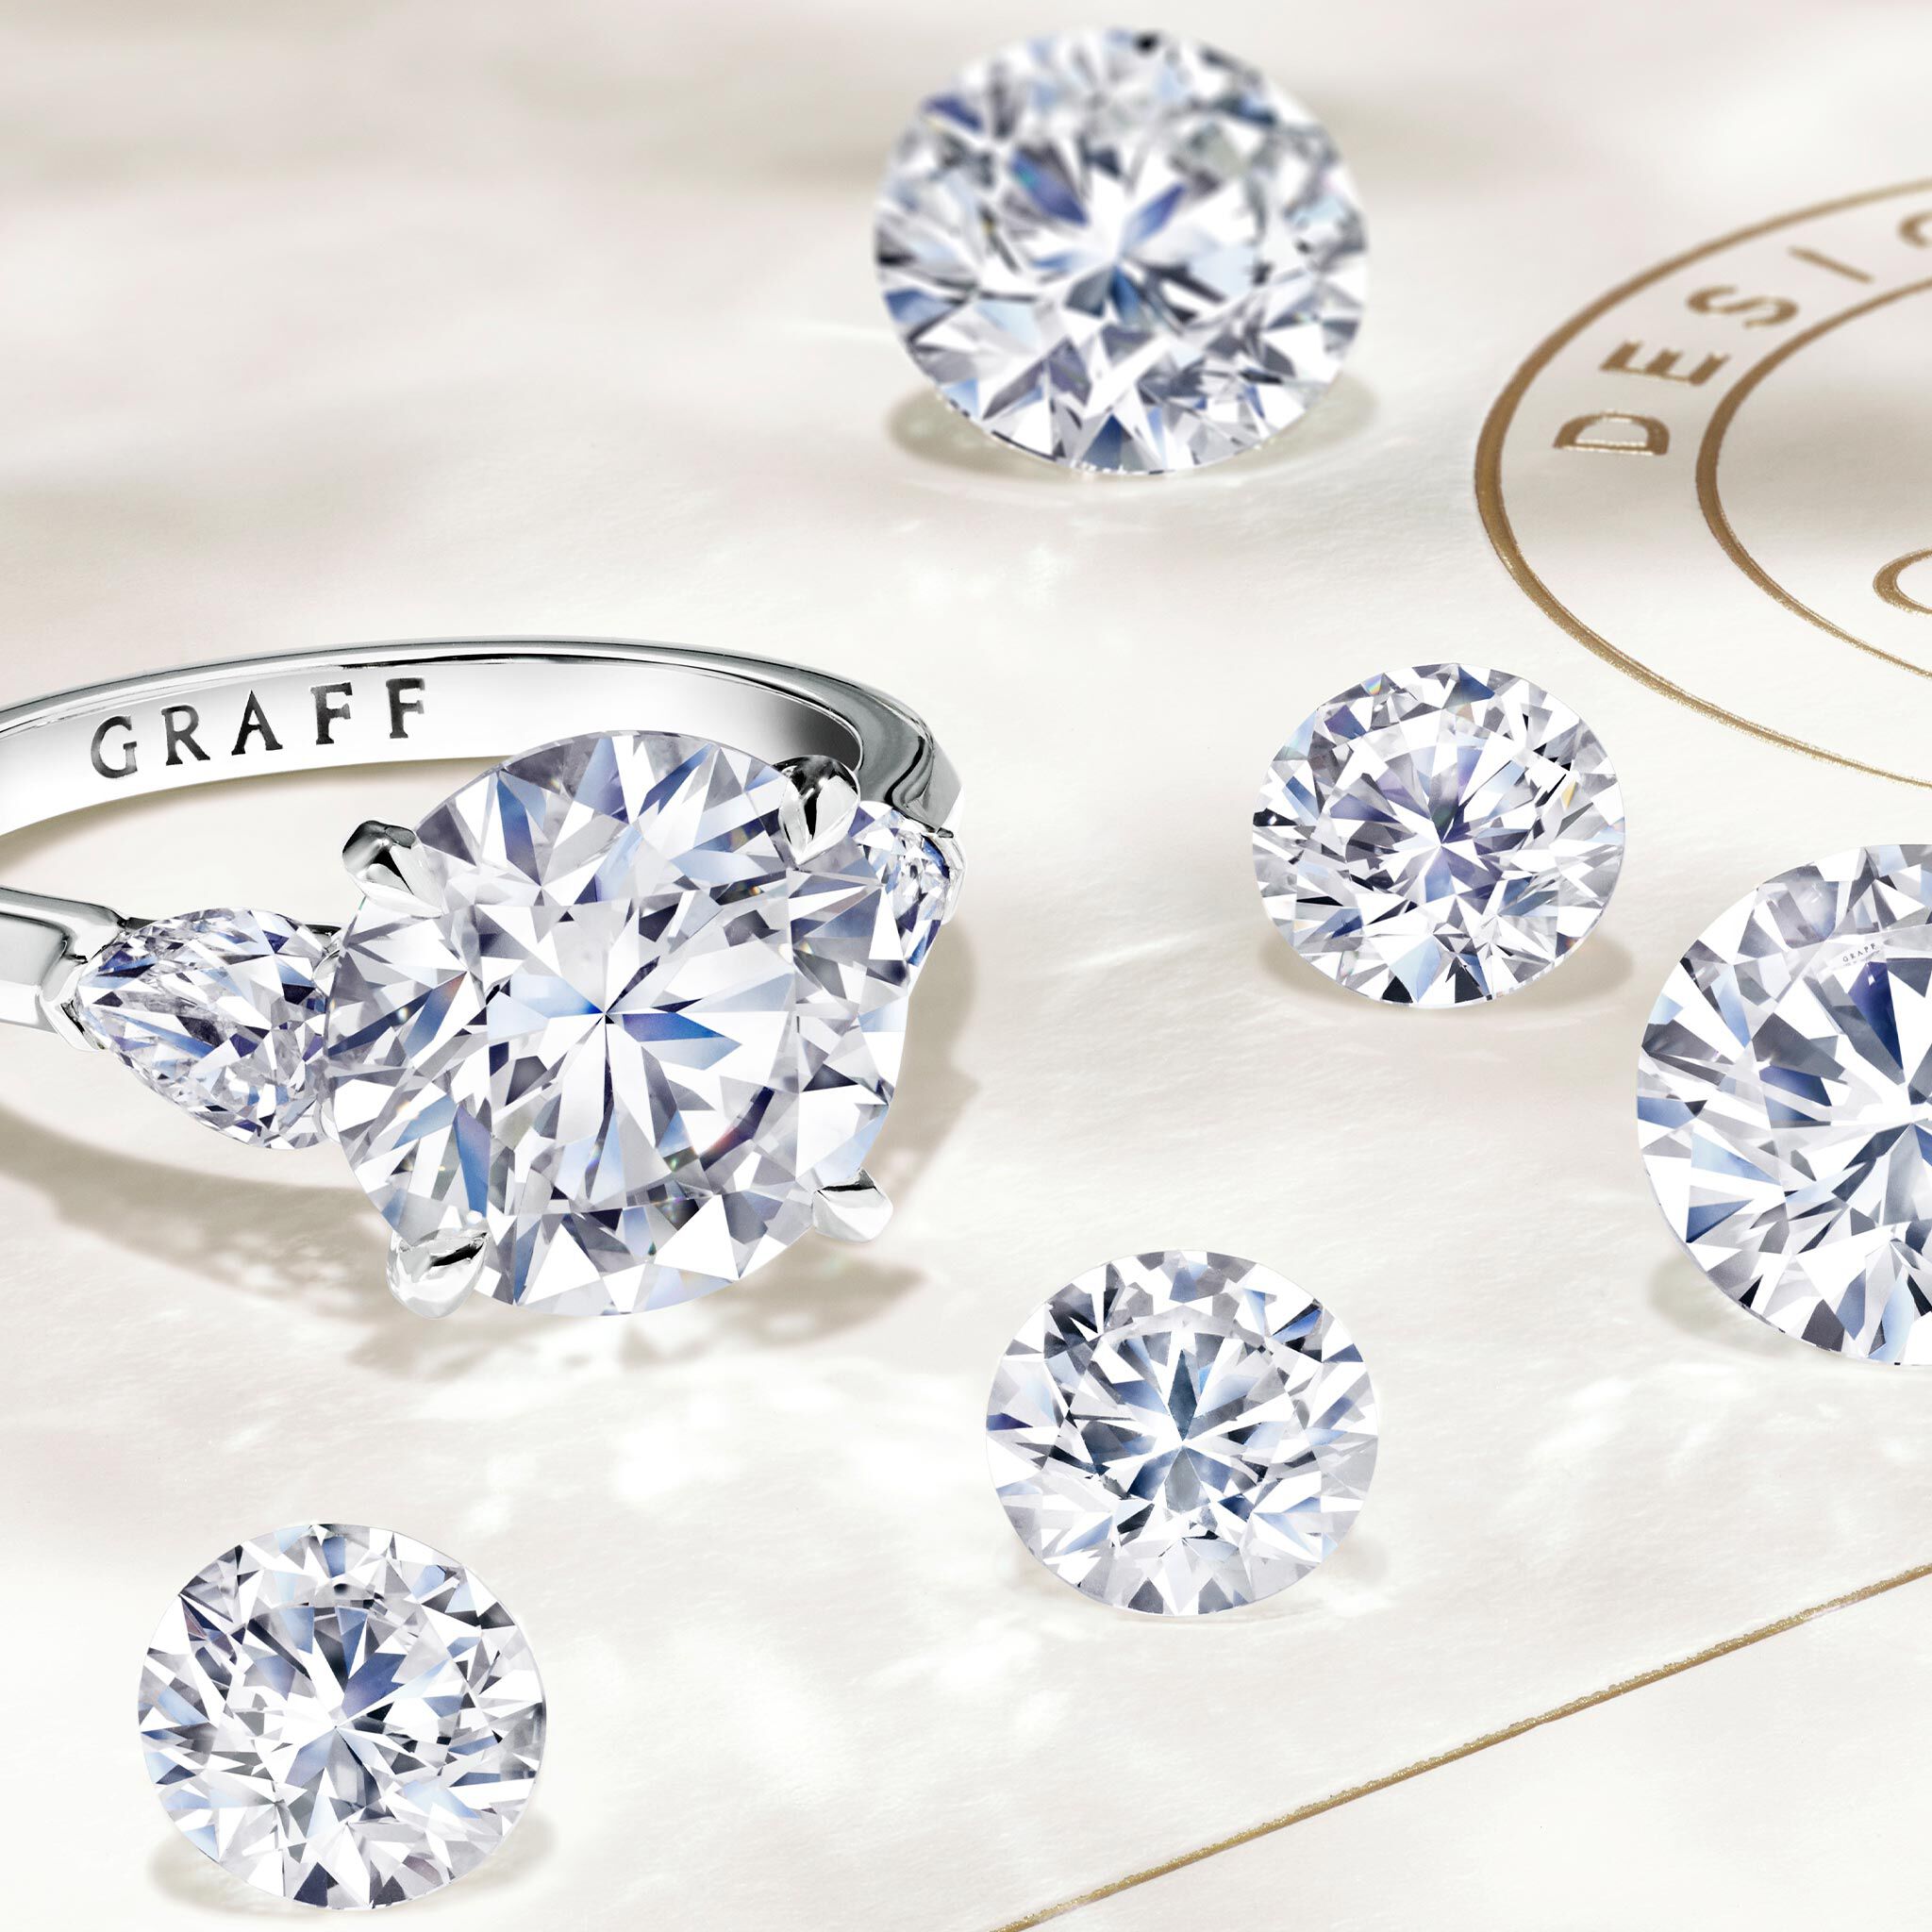 Legacy Round Diamond Engagement Ring from the Graff bridal collection